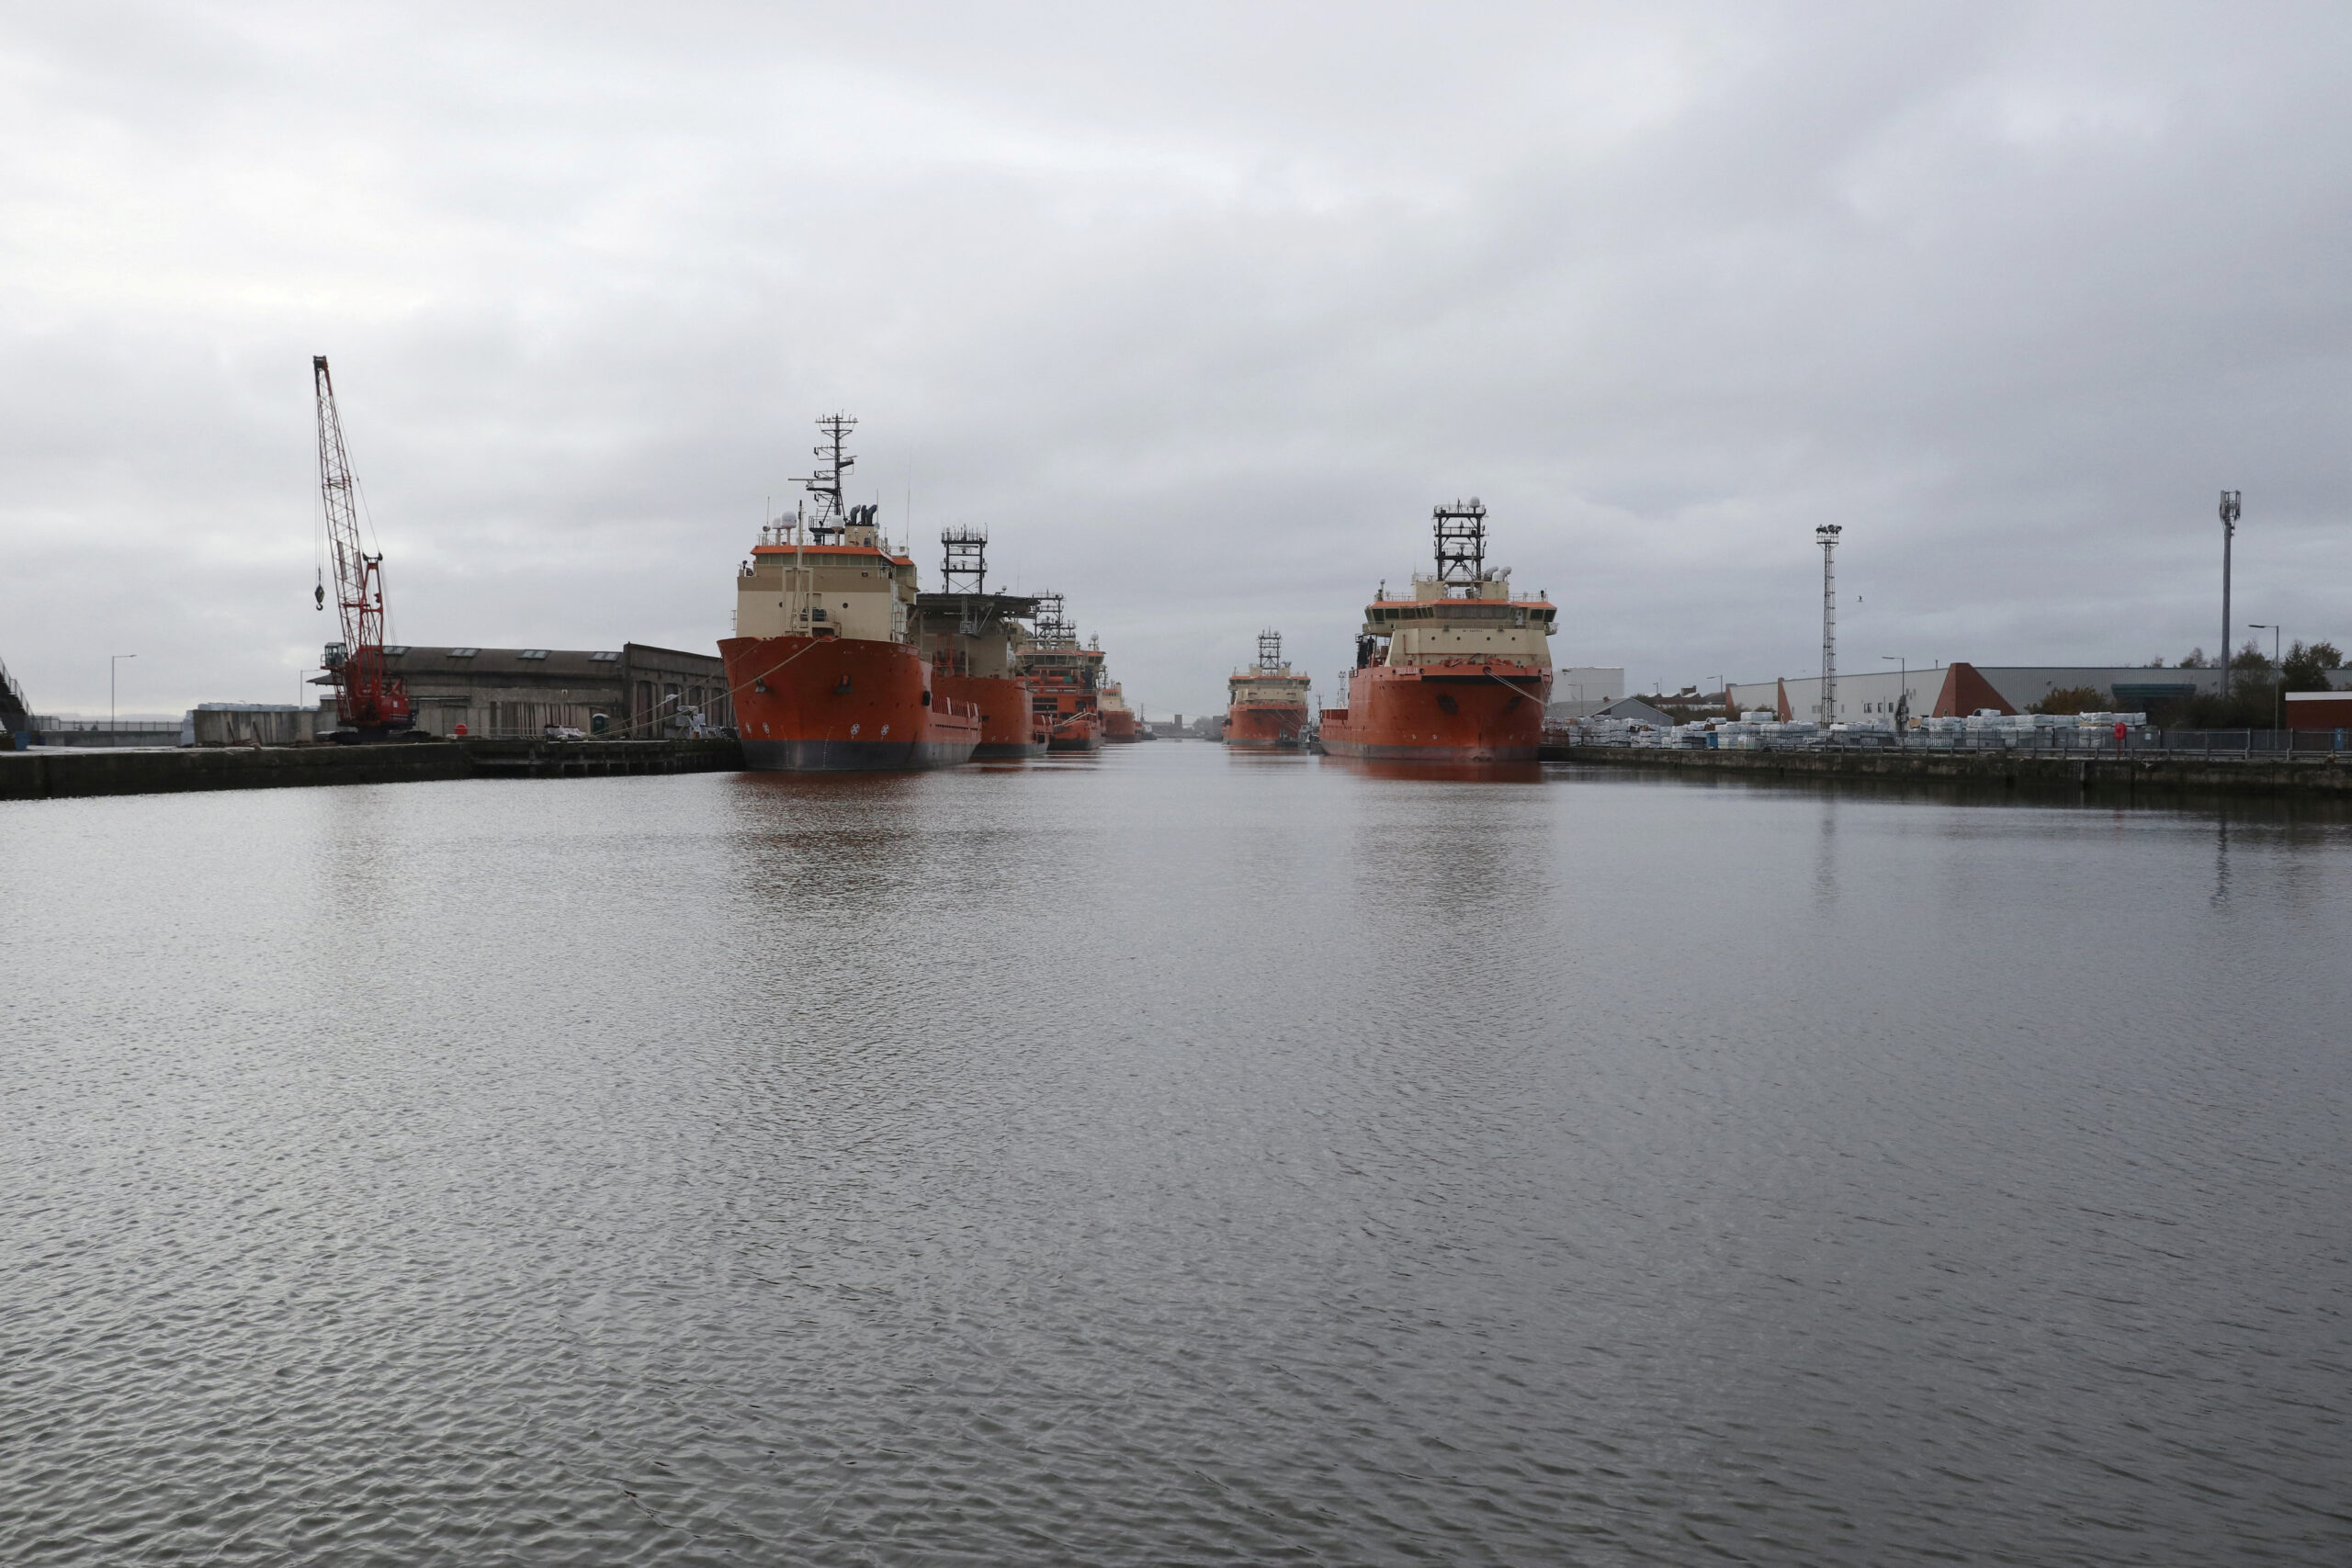 Vessels that are used for towing oil rigs in the North Sea are moored up at William Wright docks in Hull. REUTERS/Russell Boyce